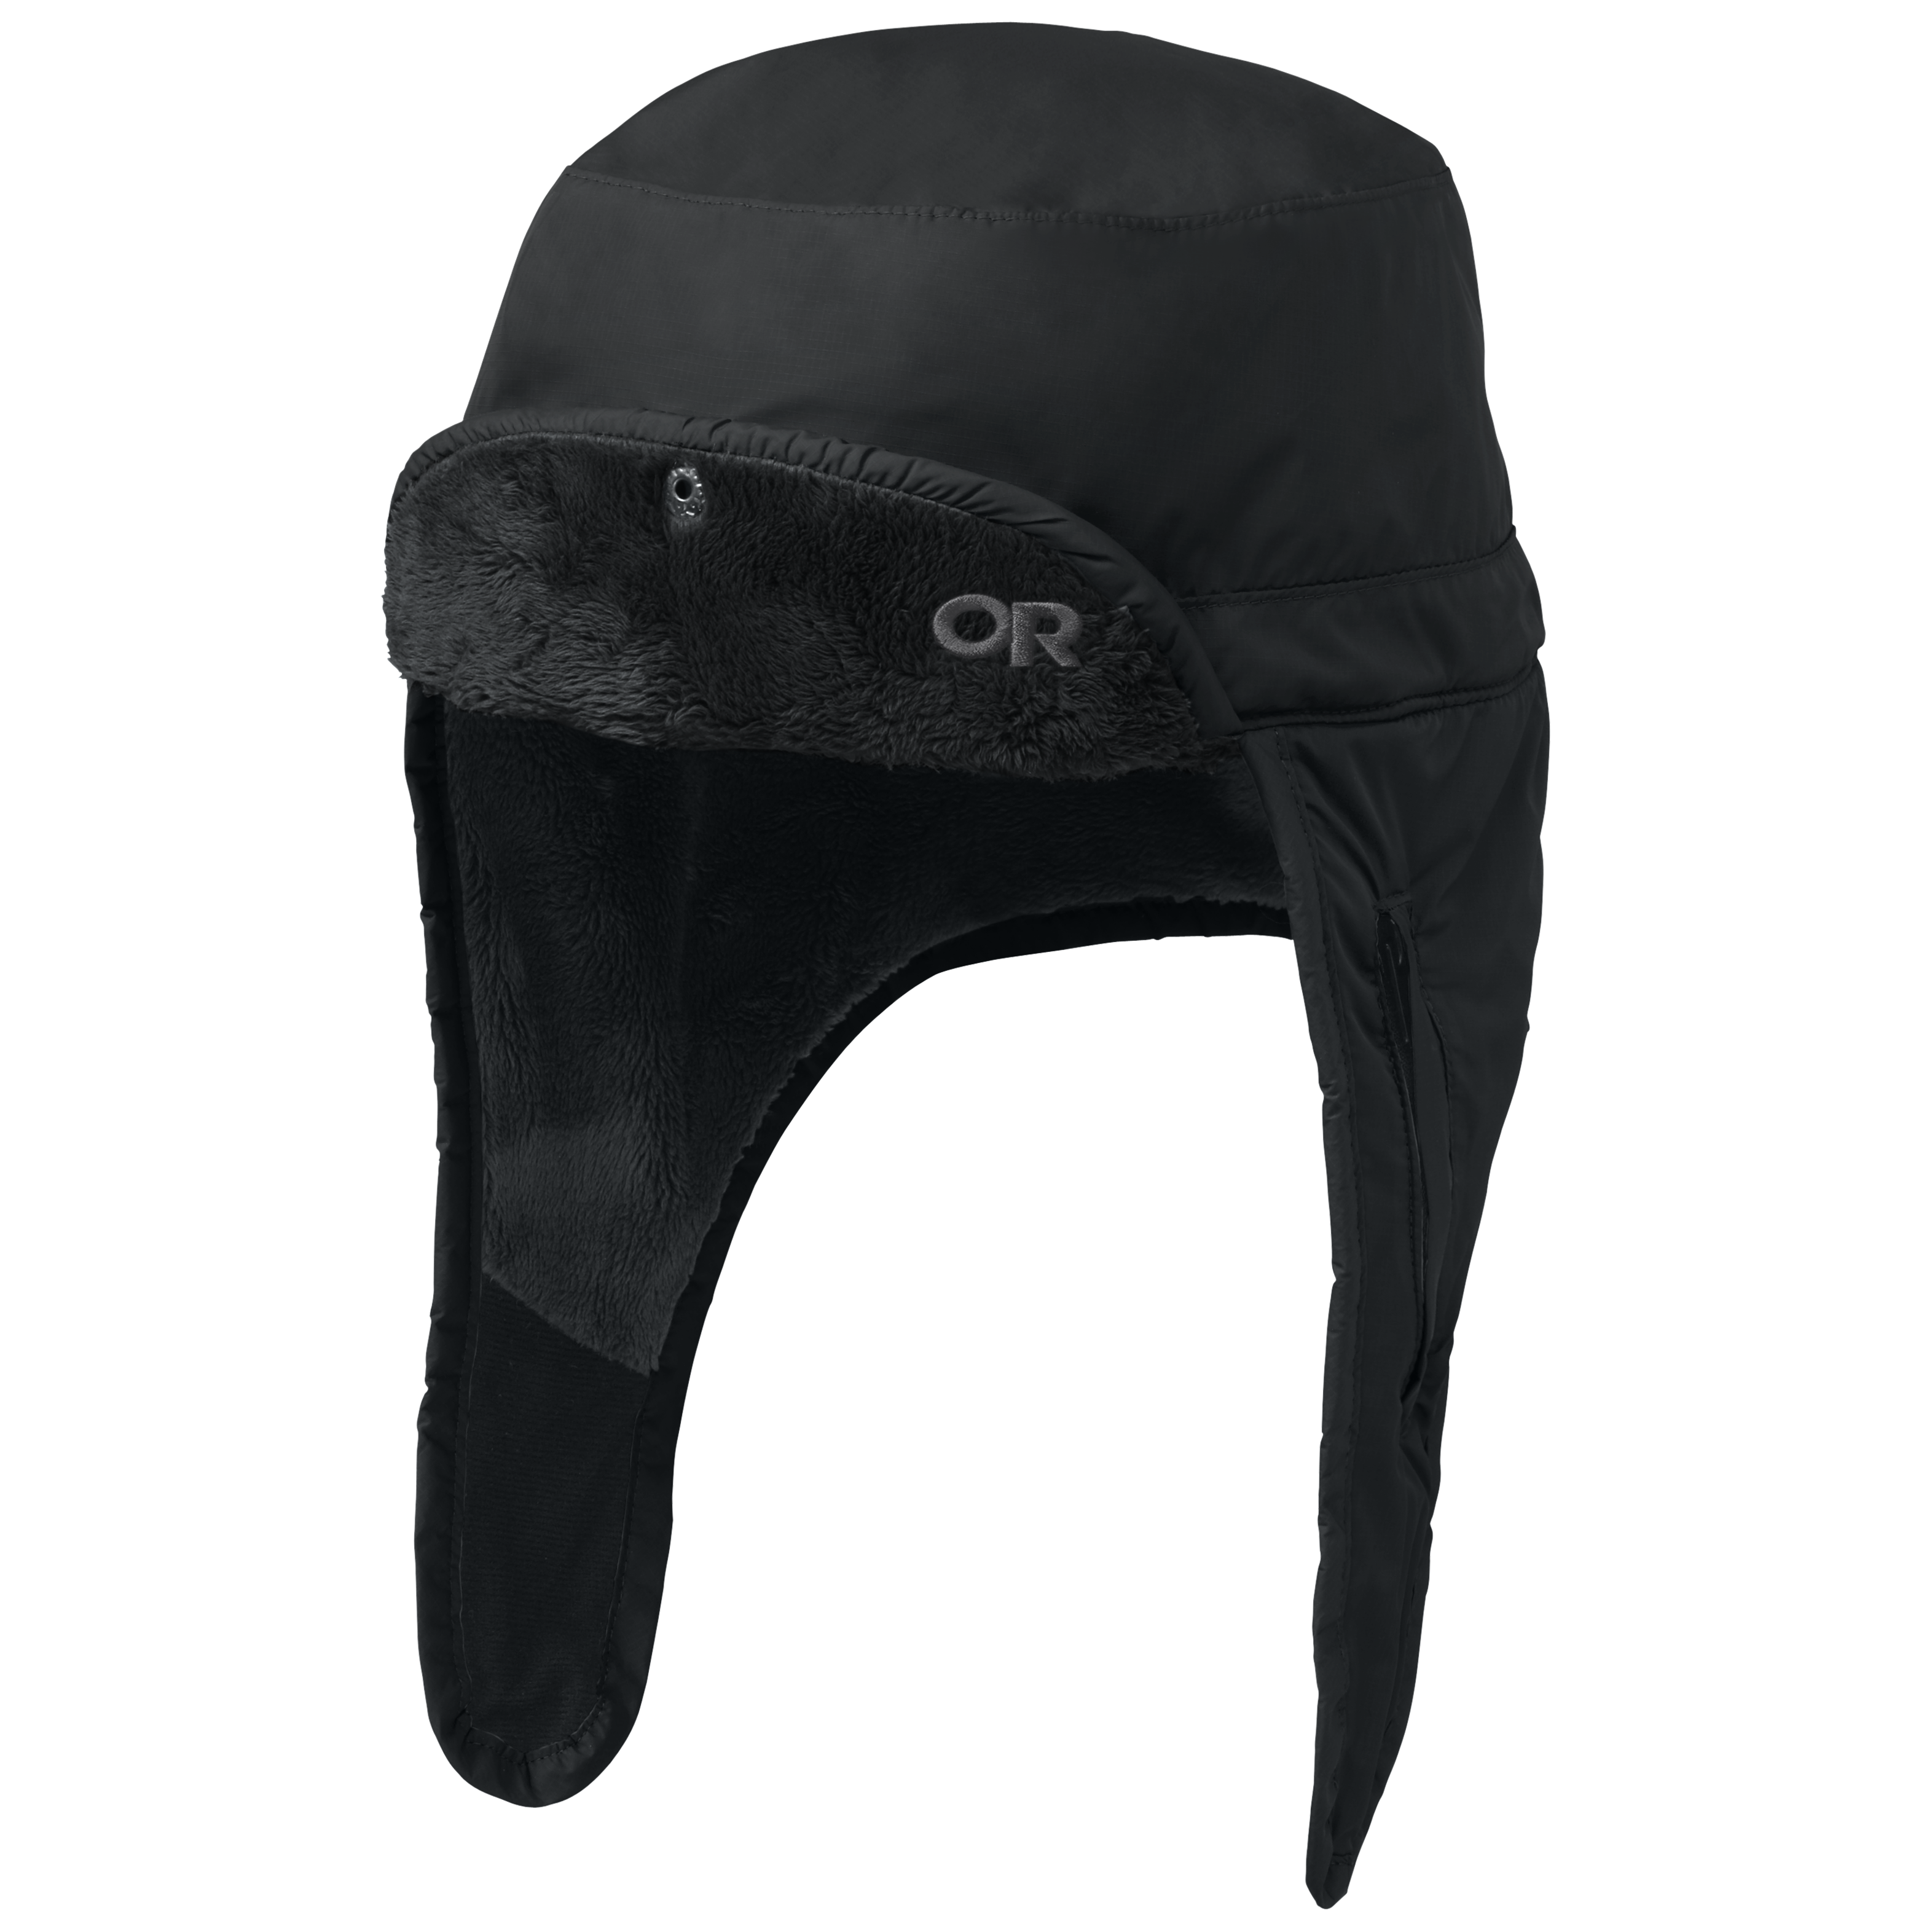 Outdoor Research Frostline Hat, Black, Large : Outdoor Research